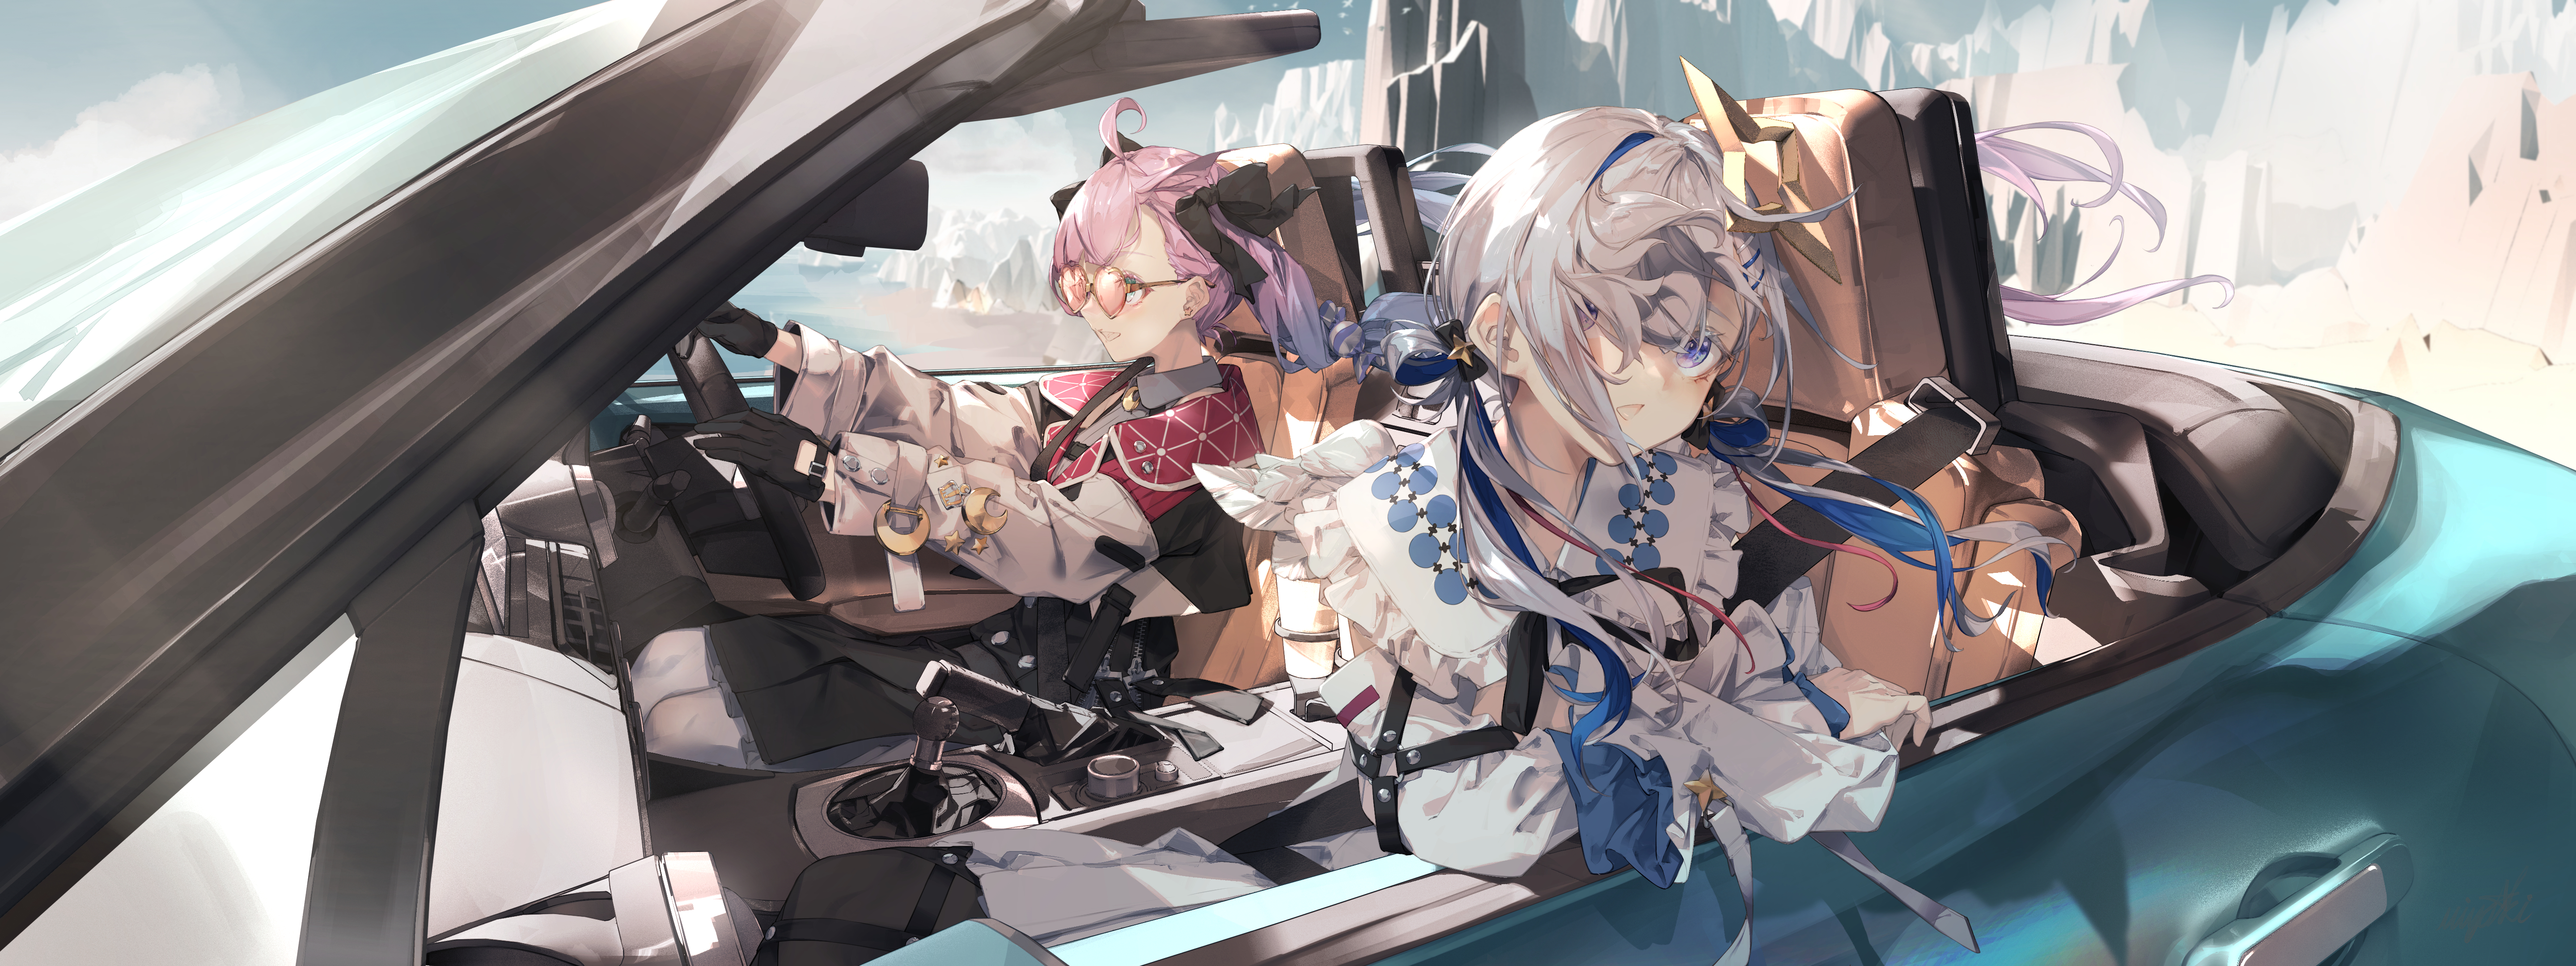 Anime Anime Girls Car Vehicle Driving Gloves Long Hair Hair Blowing In The Wind Looking Away Car Int 5760x2160